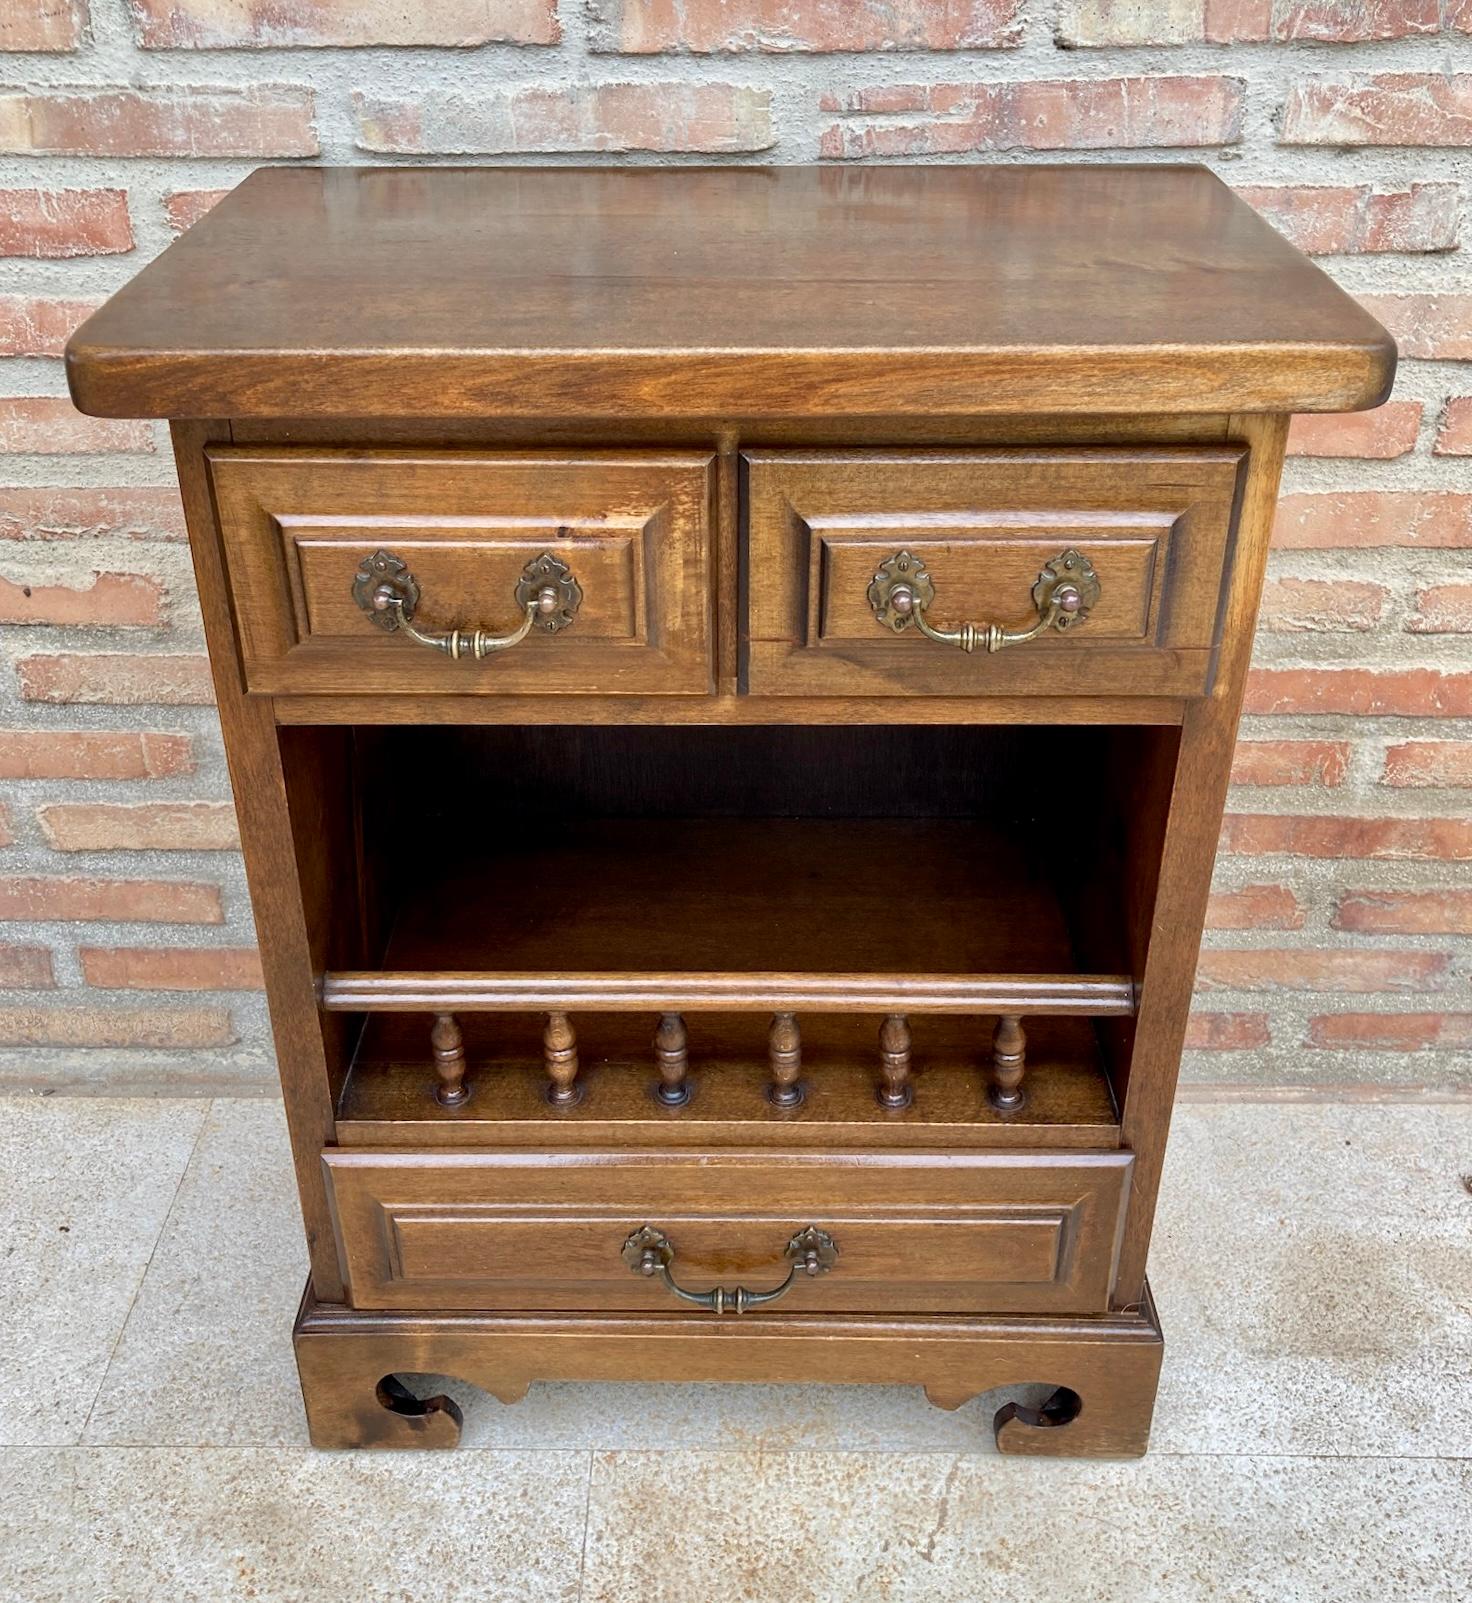 20th Spanish Nightstands With Three Drawers One Shelf And Bronze Hardware 1970s, In Good Condition For Sale In Miami, FL